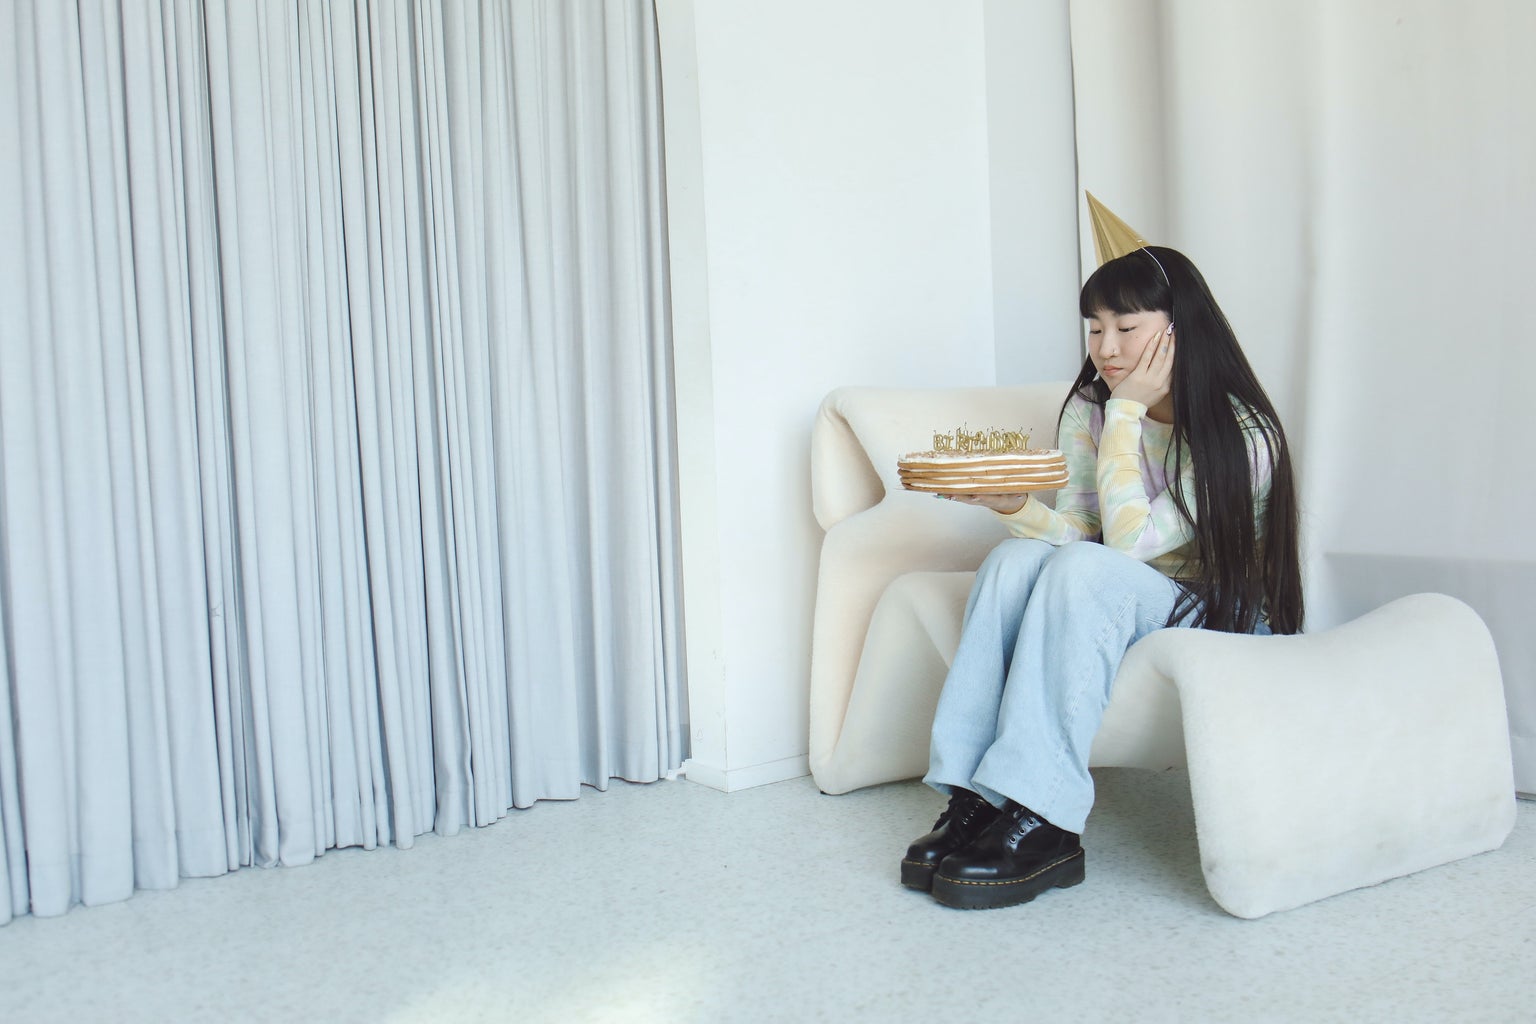 Woman sitting on couch looks at her birthday cake.